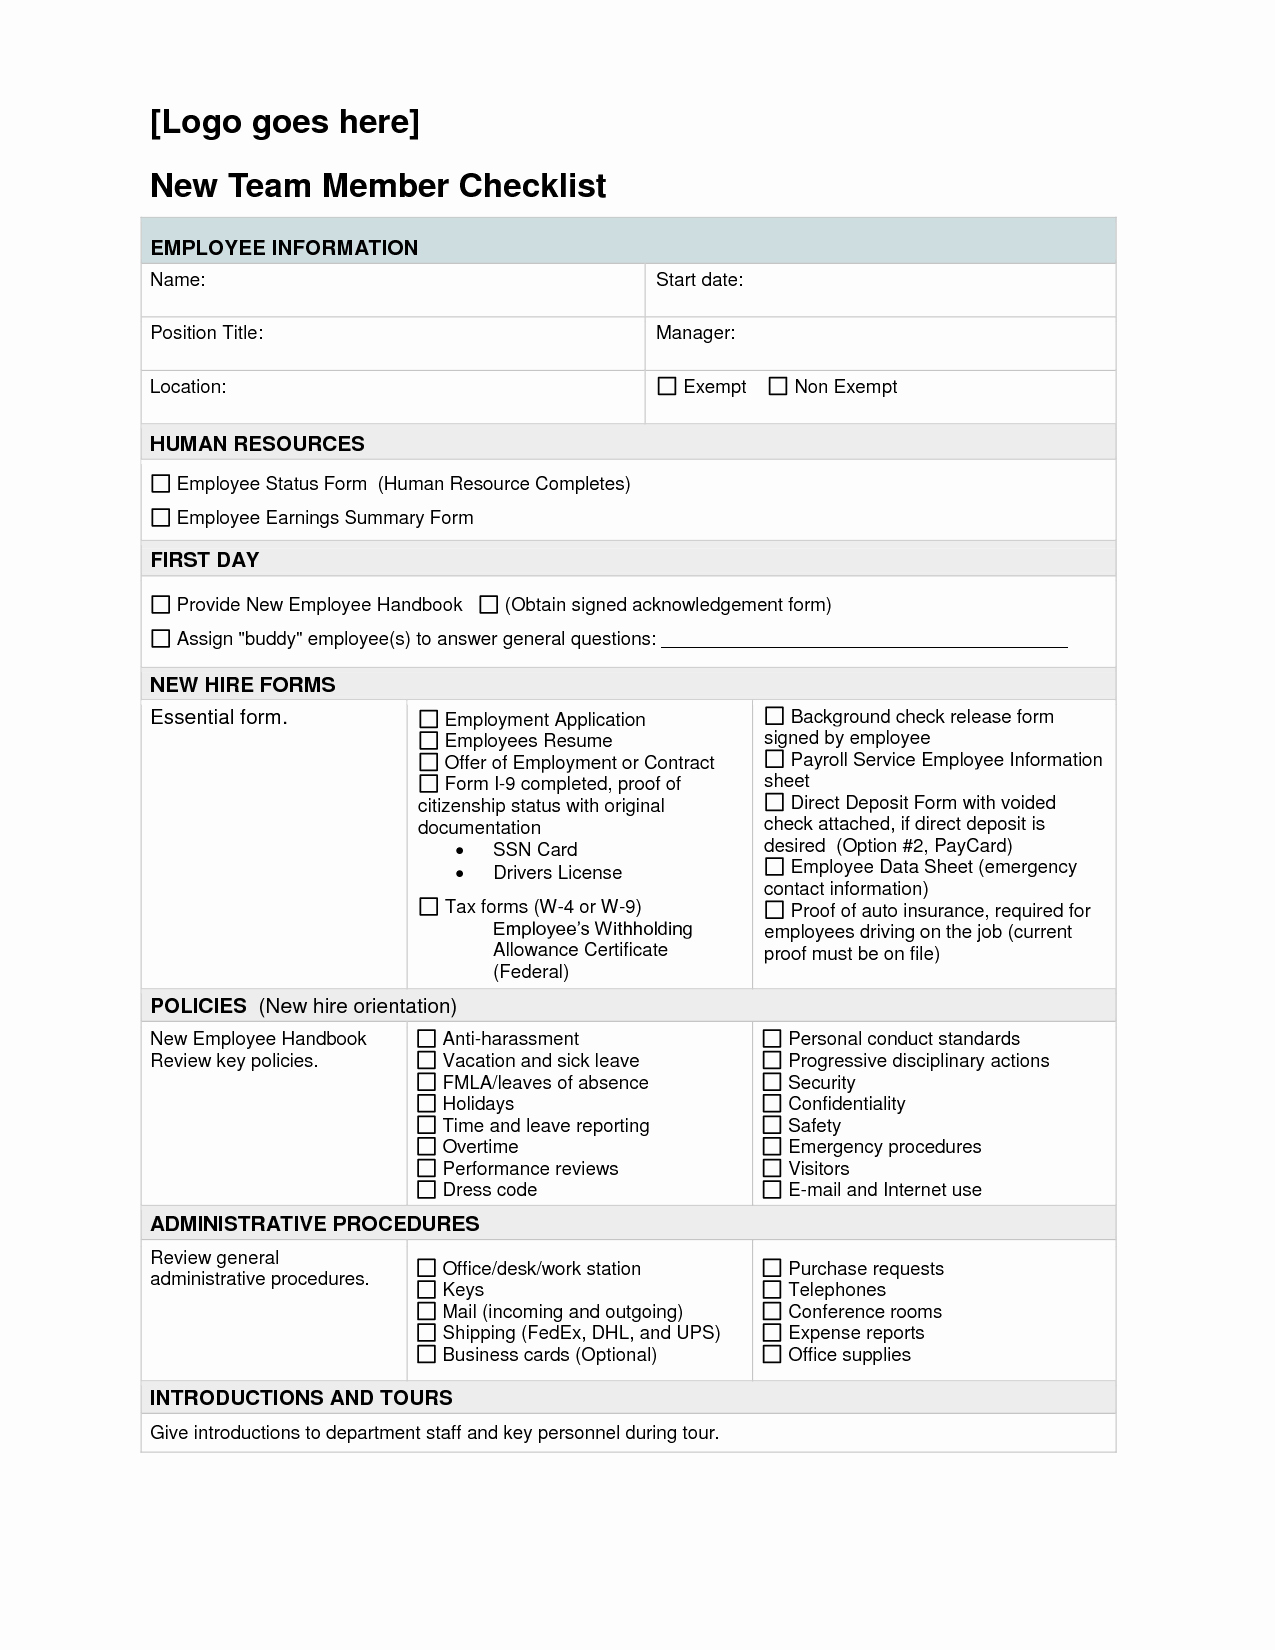 New Hire form Template New New Hire Checklist Full Version